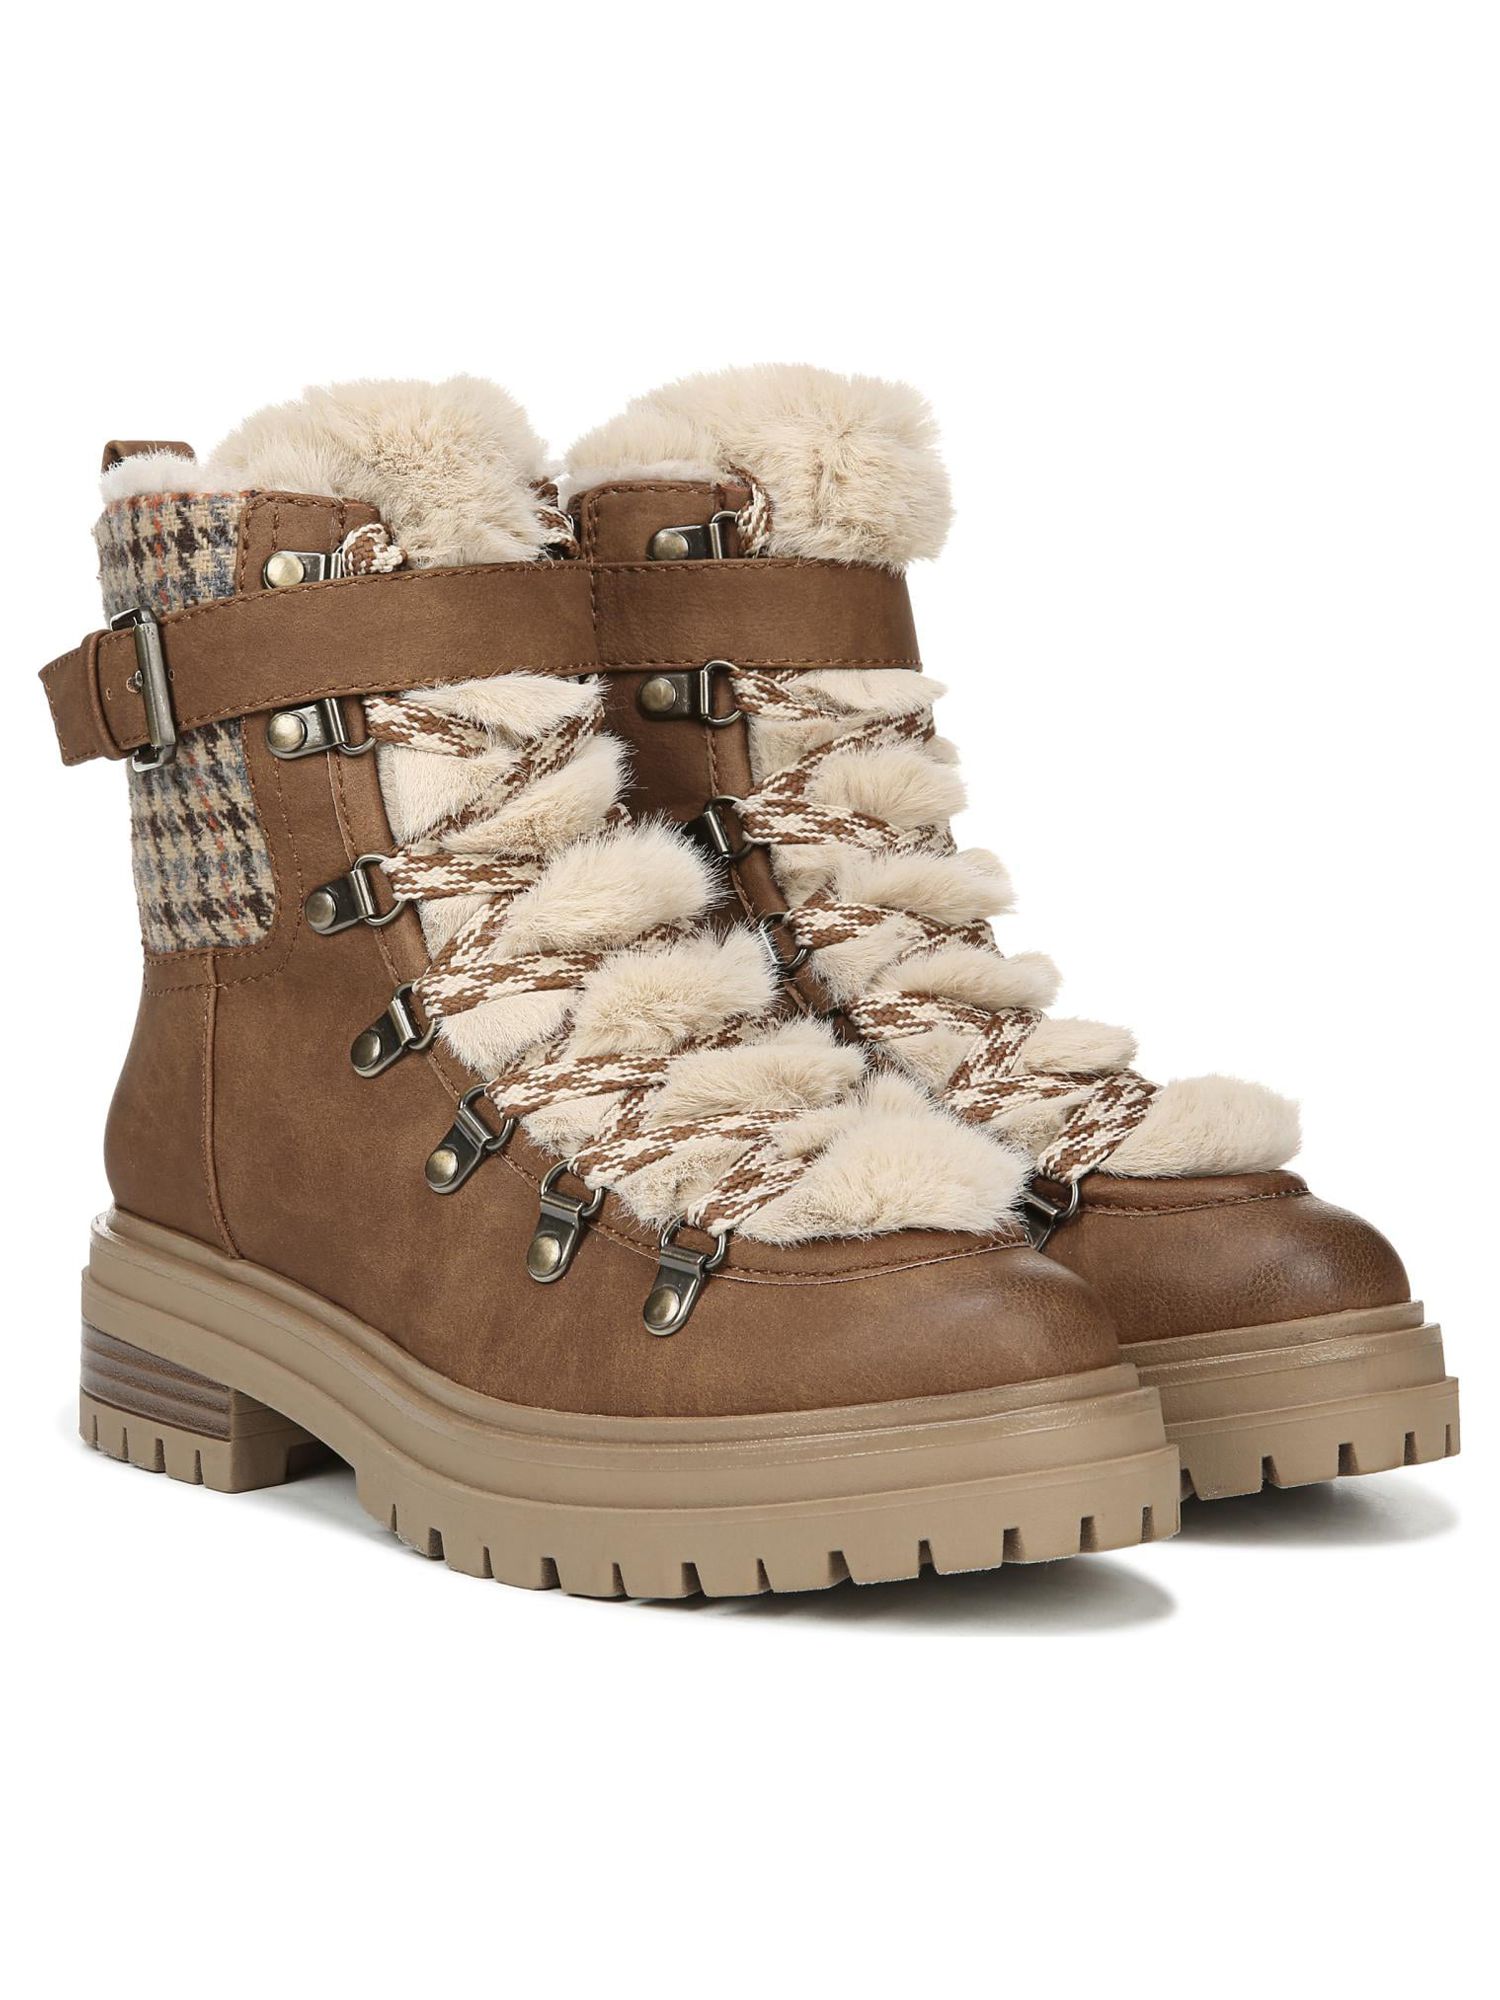 Circus by Sam Edelman Women's Gretchen Shearling Hiker Boot - image 3 of 8